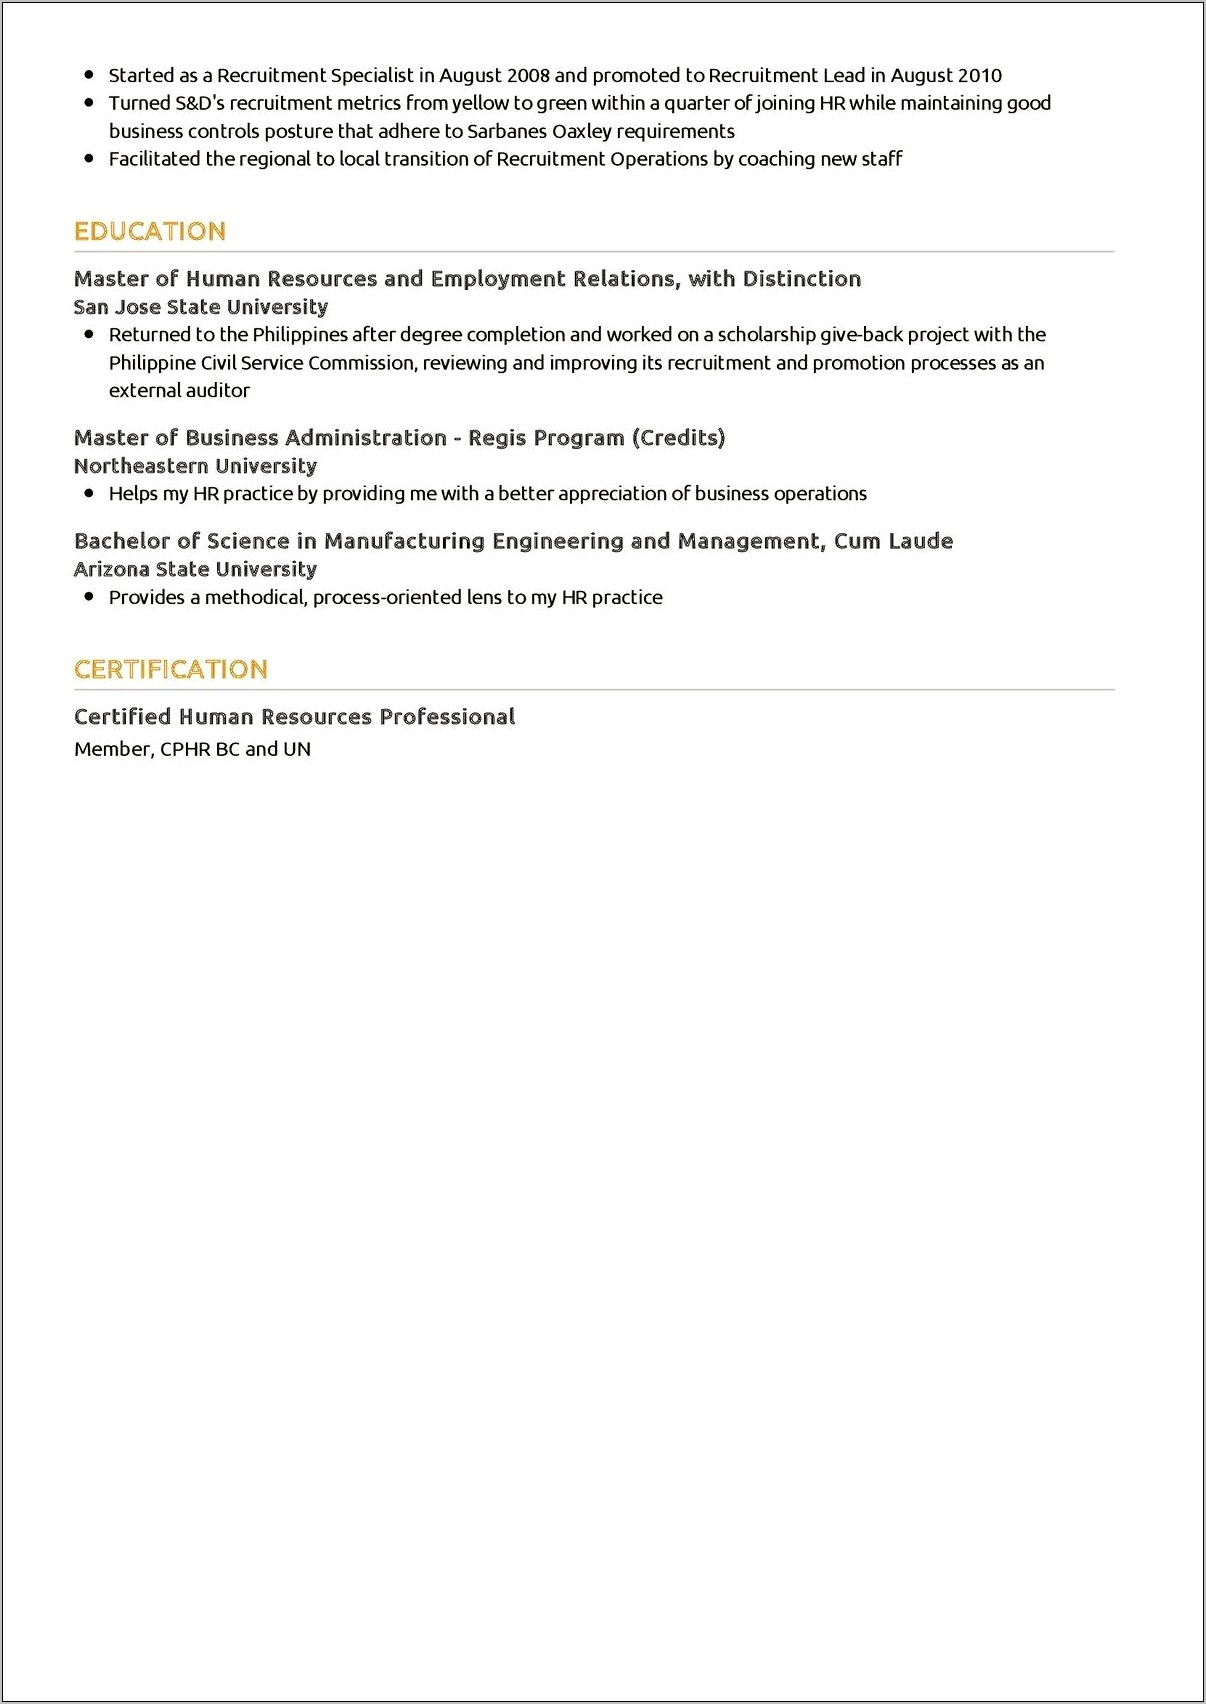 Sample Resume With Phr Certification